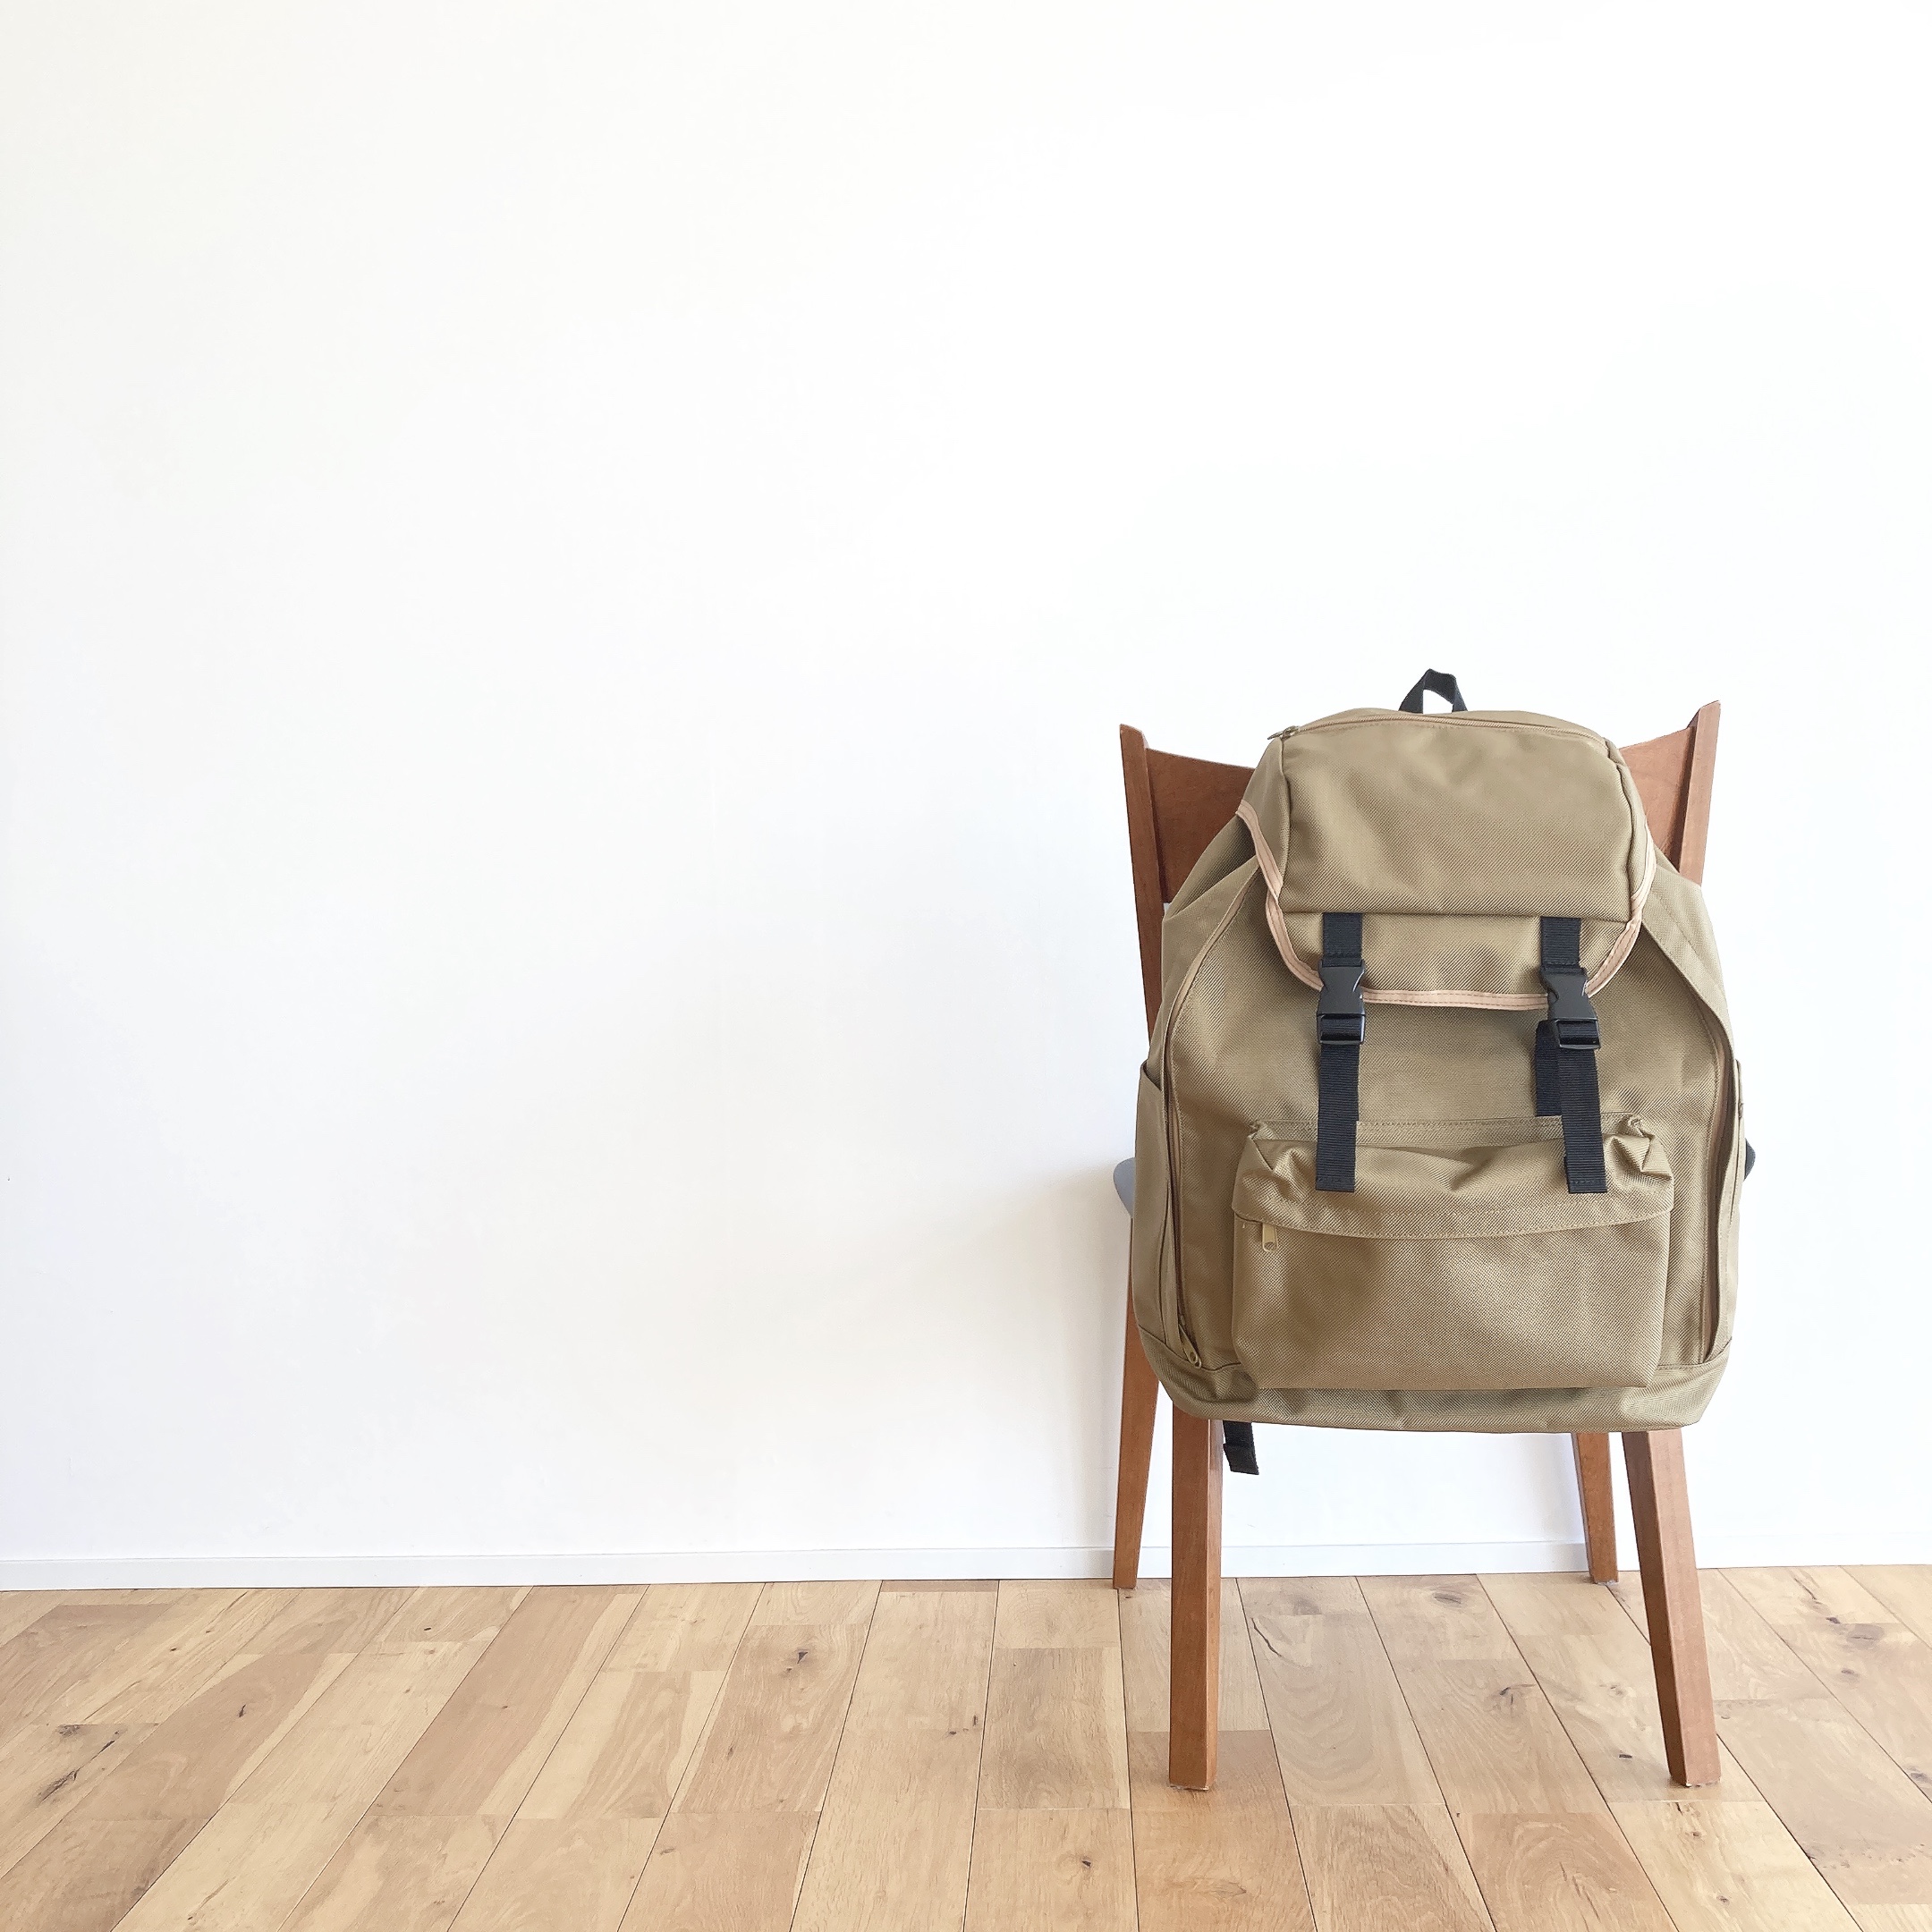 EEL Products×OutdoorのDEP.BAG